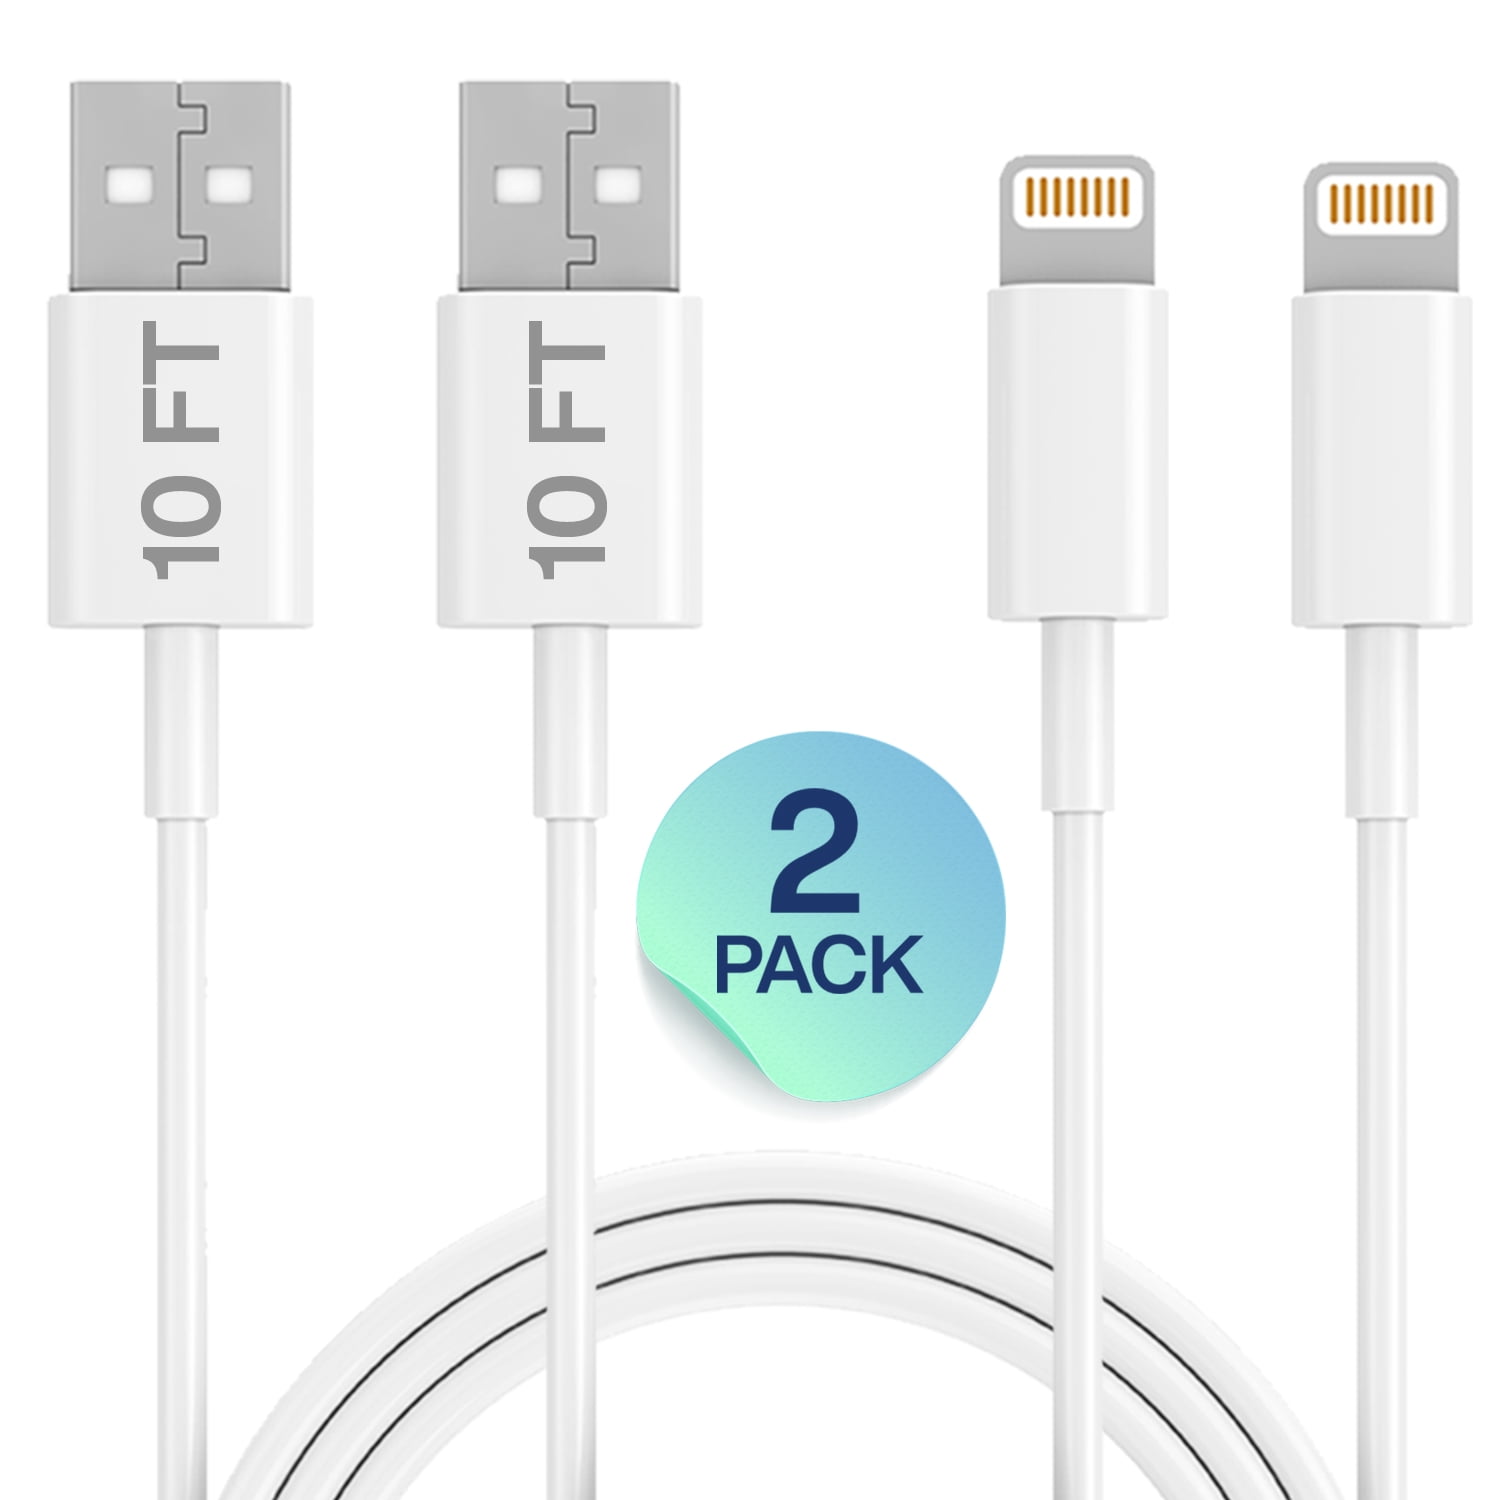 iPhone Lightning Cable Set 3FTx2,6FTx2, 10FT USB Cable Compatible with Apple iPhone Xs/Xs Max/XR/X/8/8Plus/7/7Plus/6S/6SPlus/Air/Mini/iPod Touch/Case Fast Charging & Syncing Cord Infinite Power, 